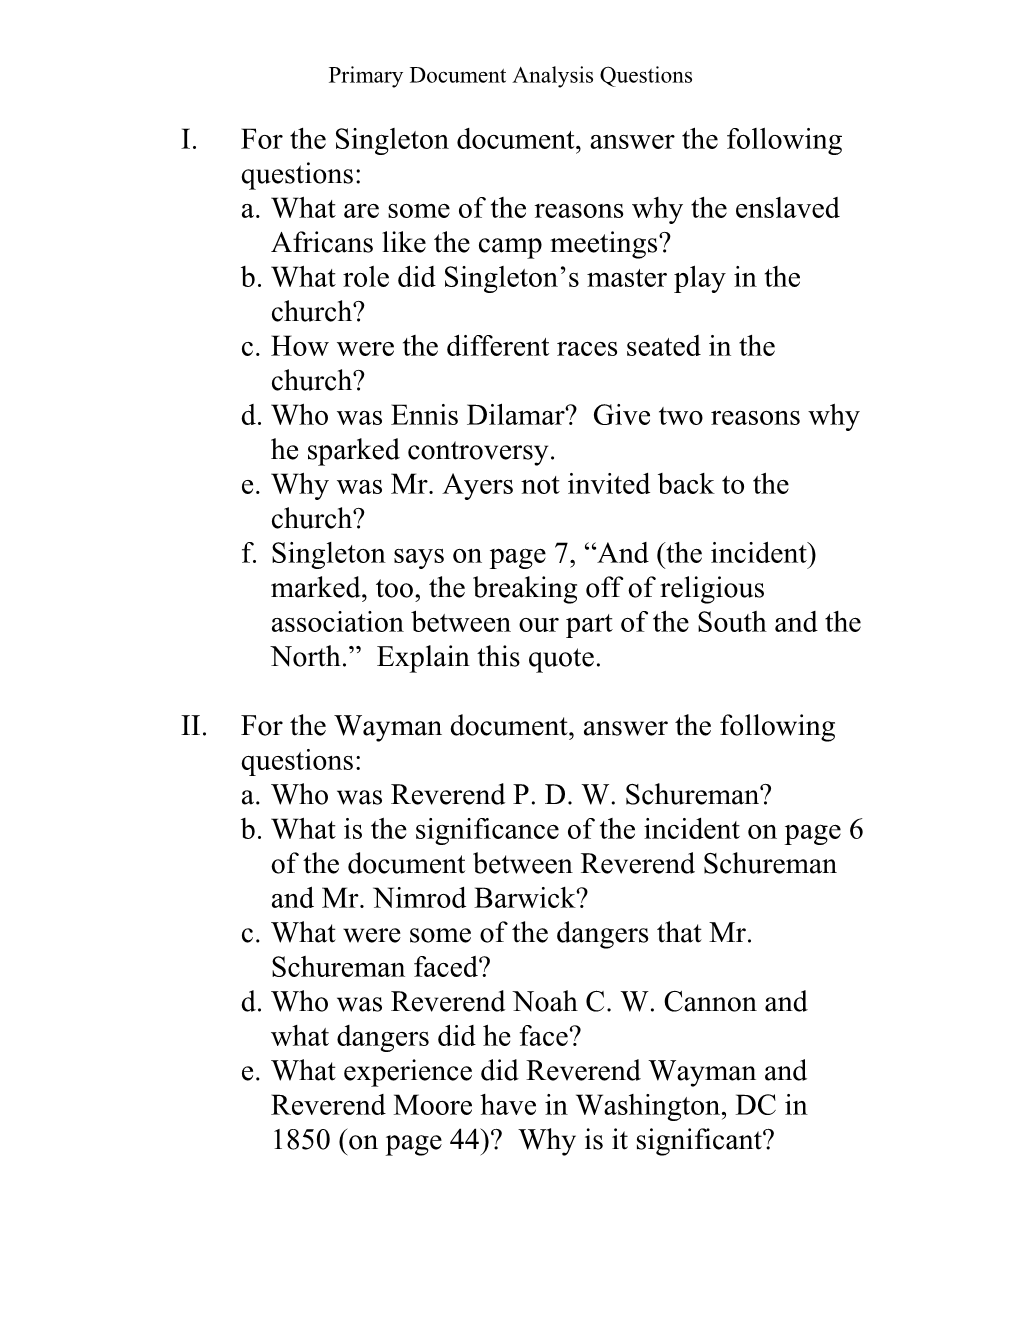 Primary Document Analysis Questions